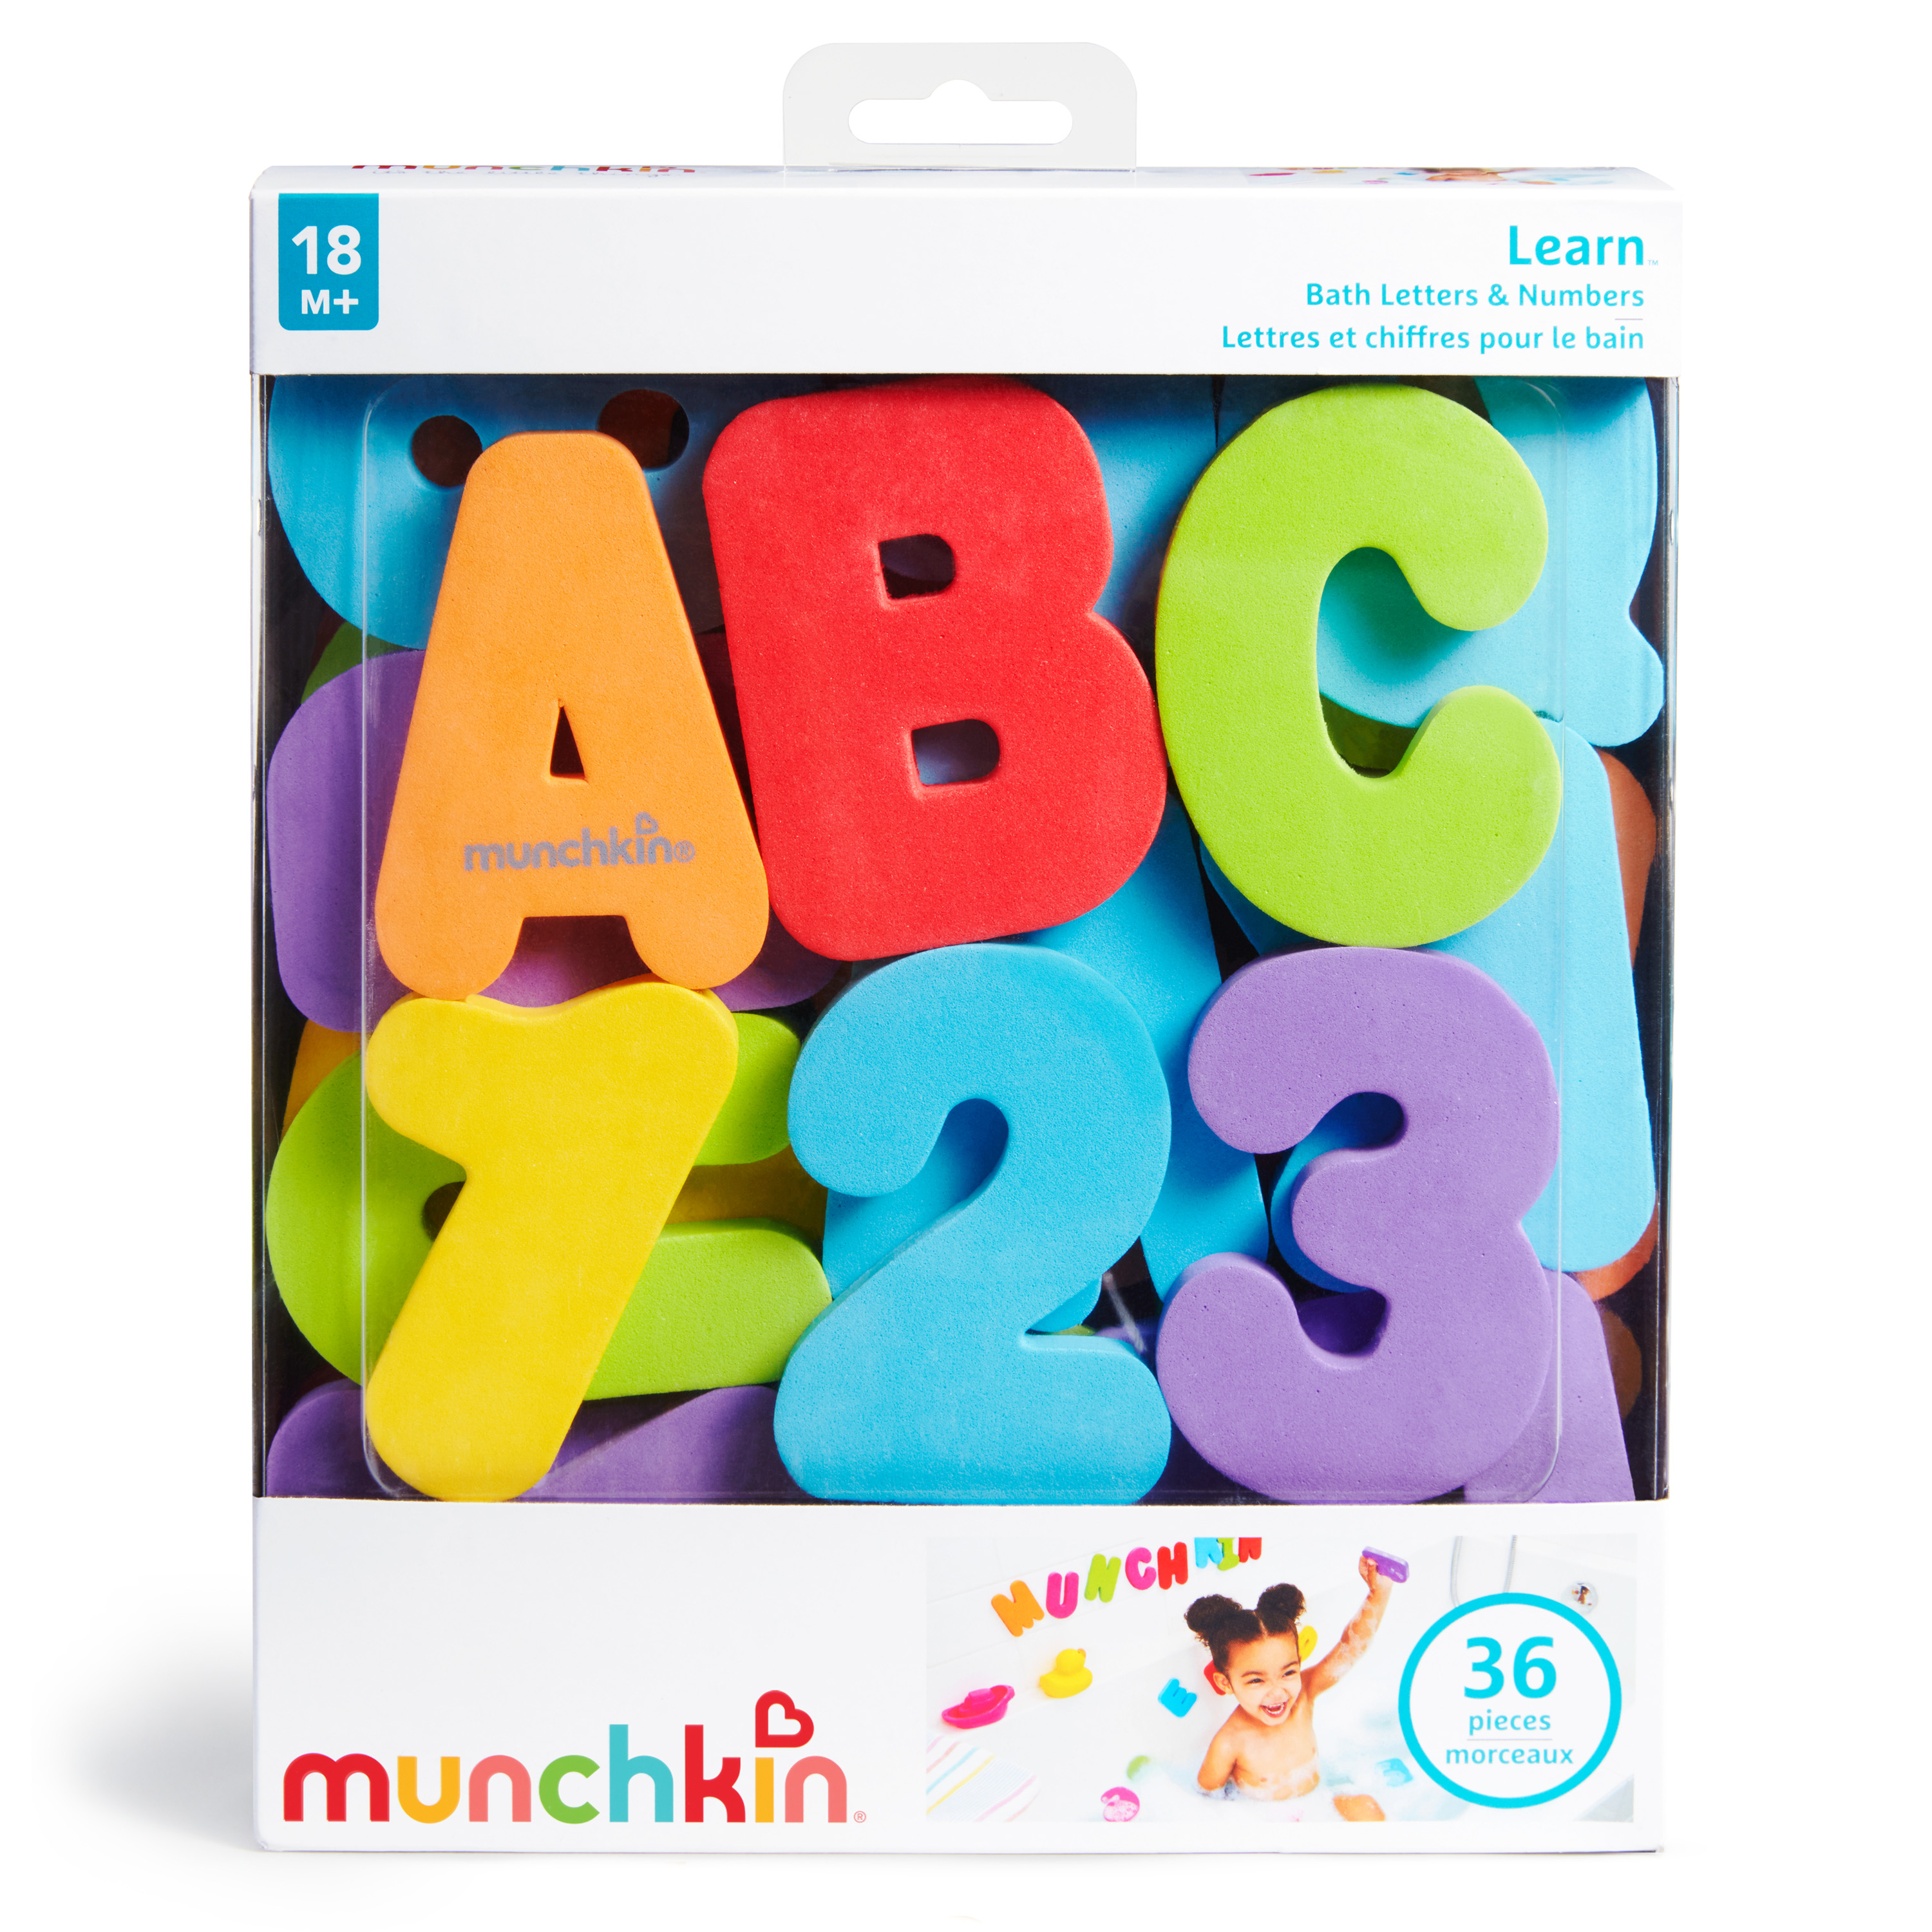 Munchkin Letters and Numbers Bath Toy, Non-Toxic, Multi-Color, 36 Count - image 5 of 8